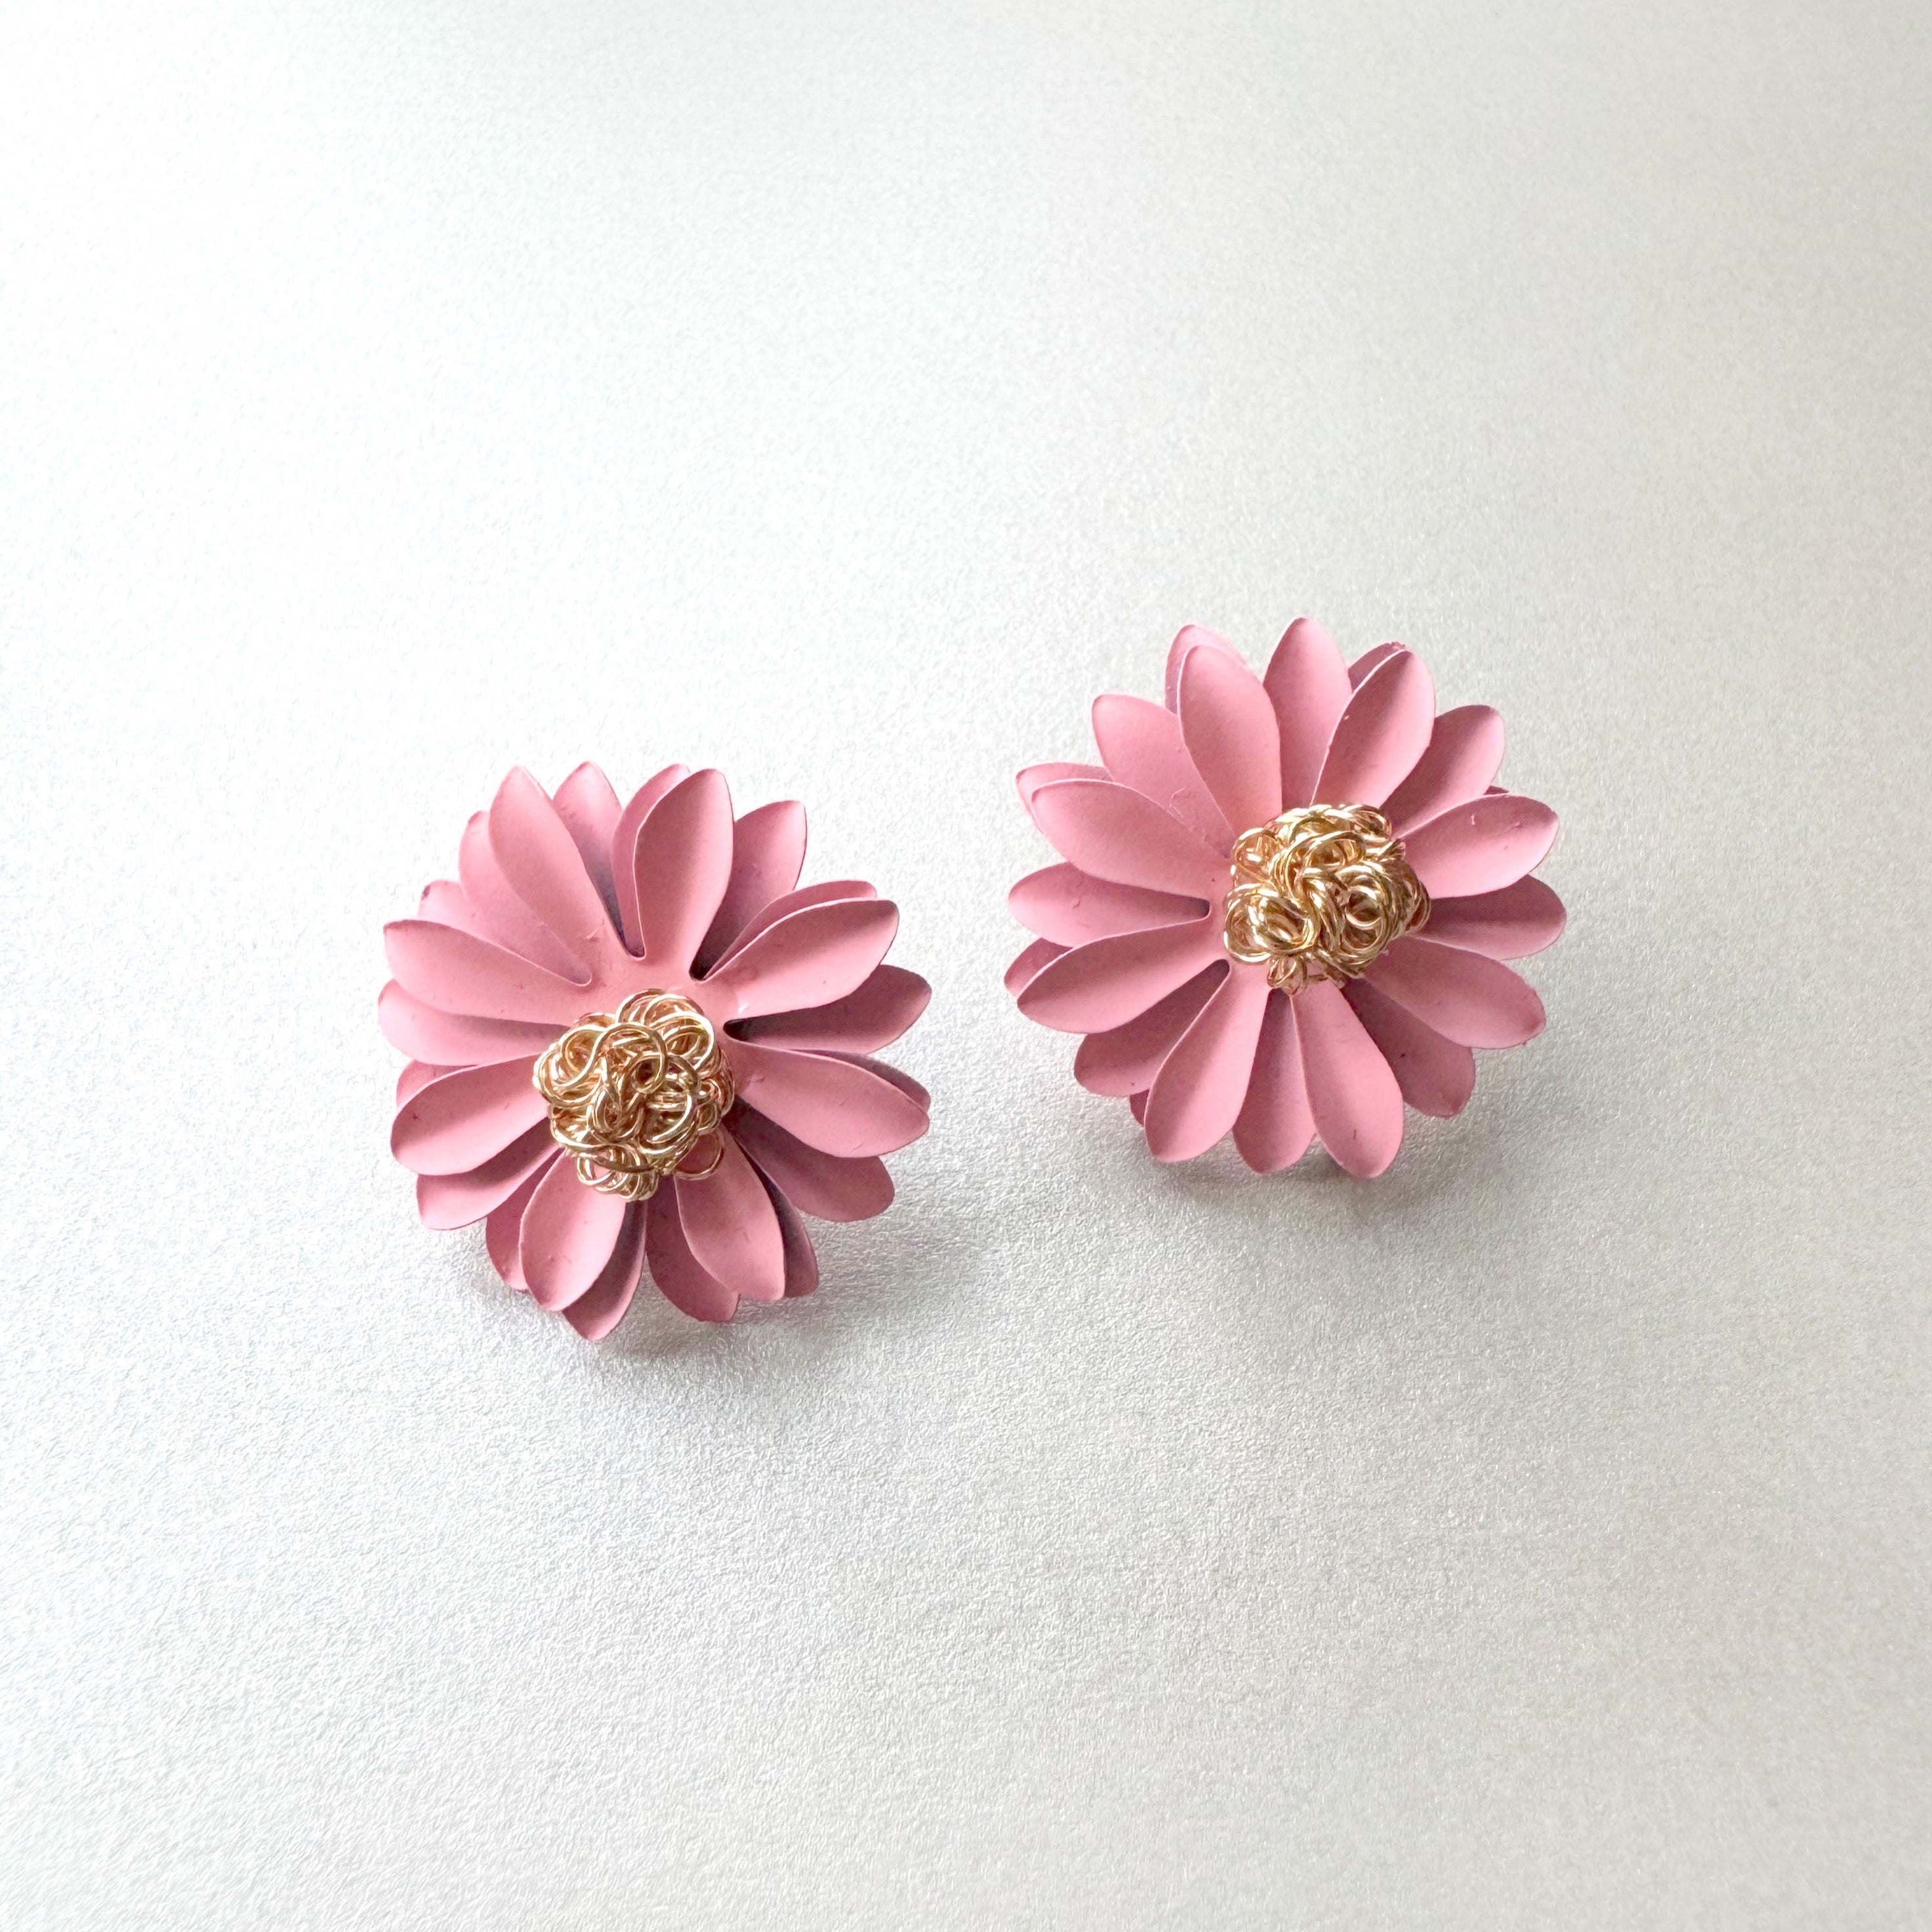 Blossom Pink Floral Stud Earrings